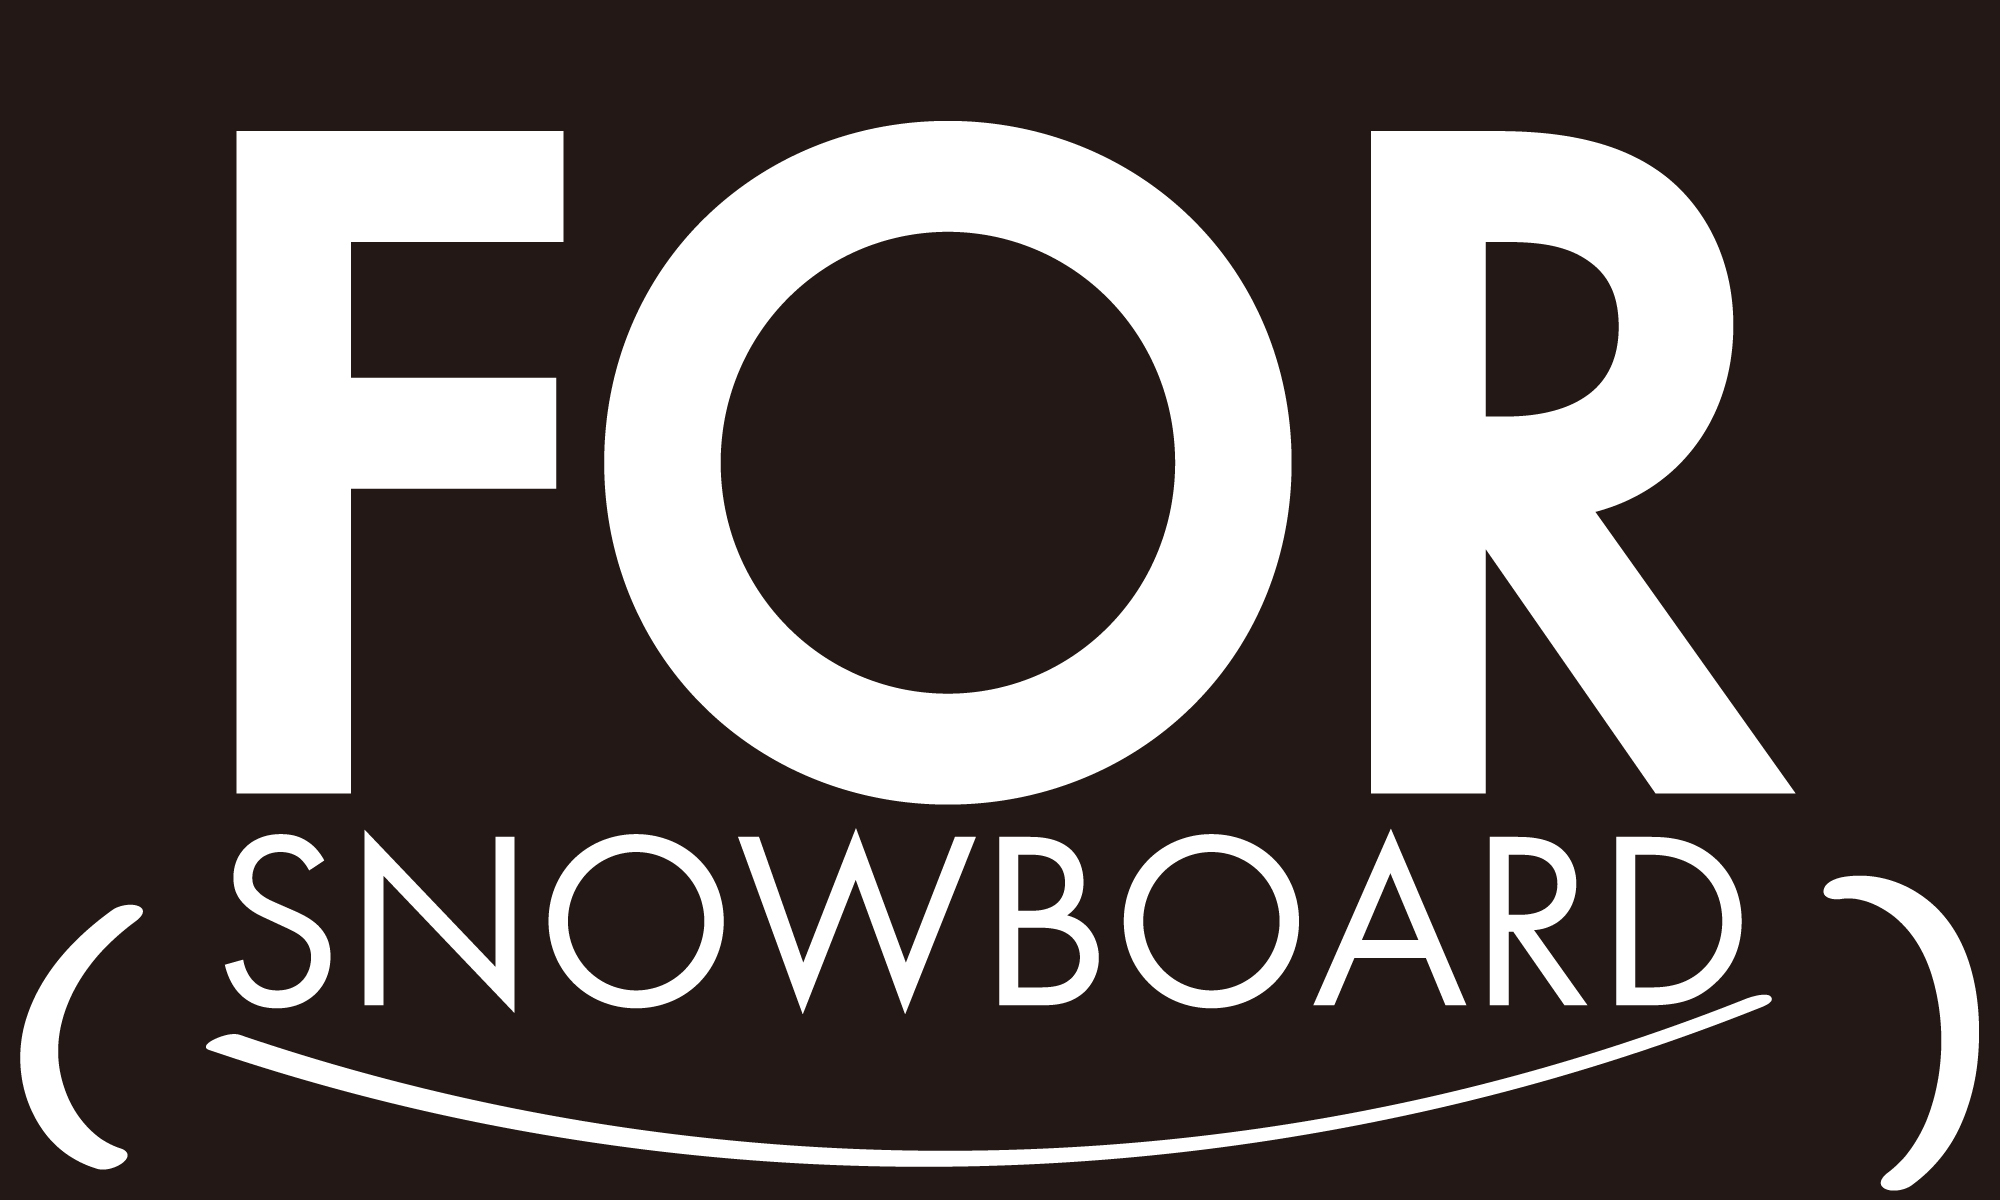 For Snowboard